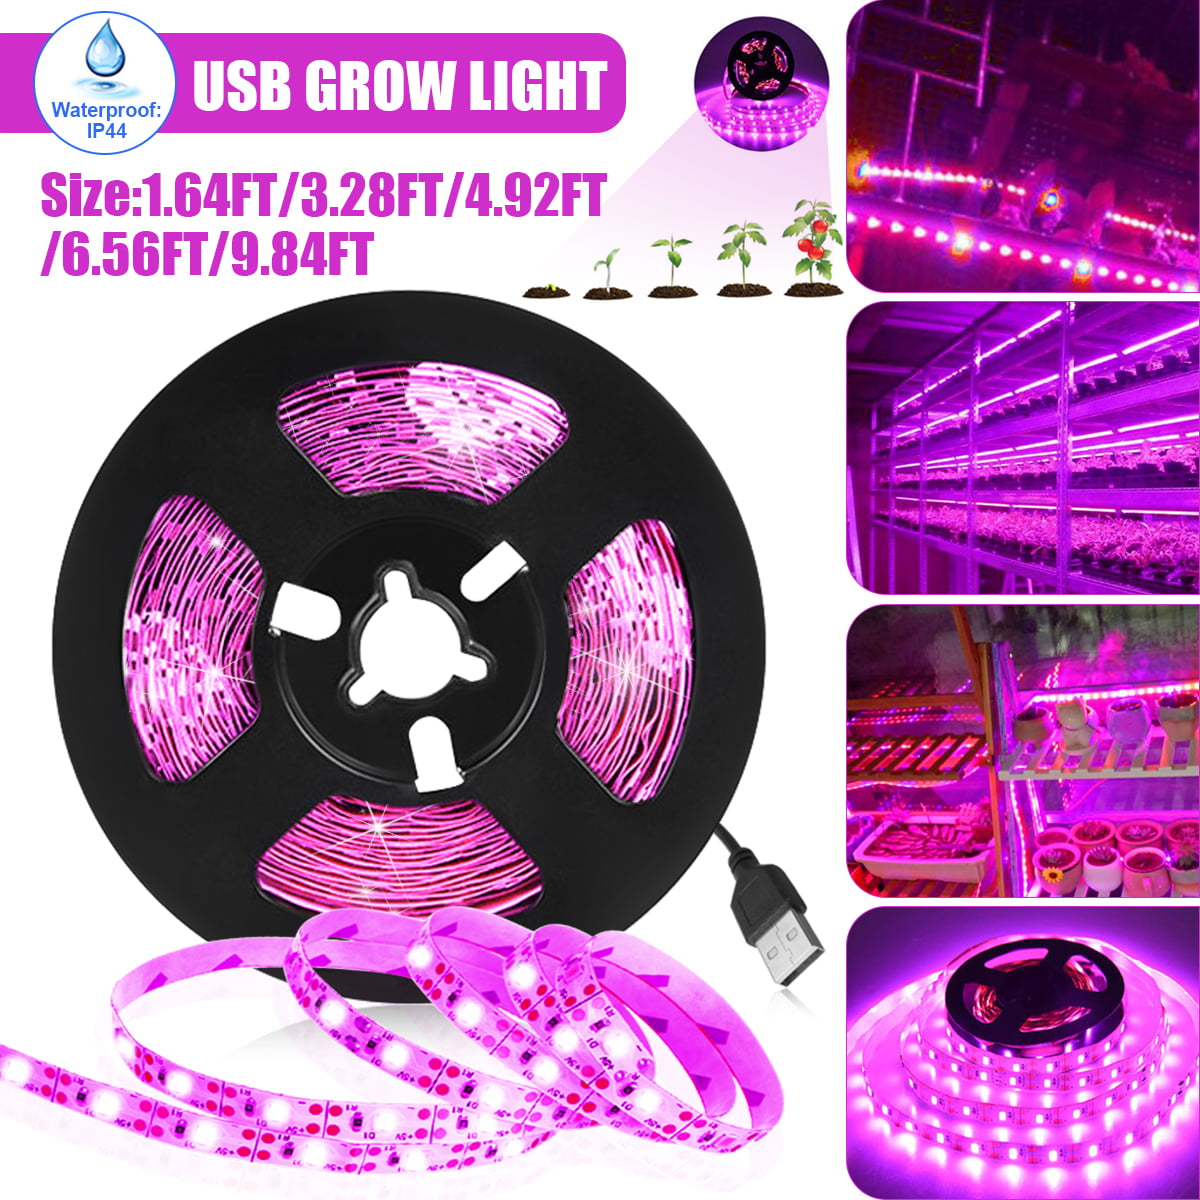 Details about   DC5V Grow Light Full Spectrum USB Waterproof Strip Light 2835 For Plant Growing 